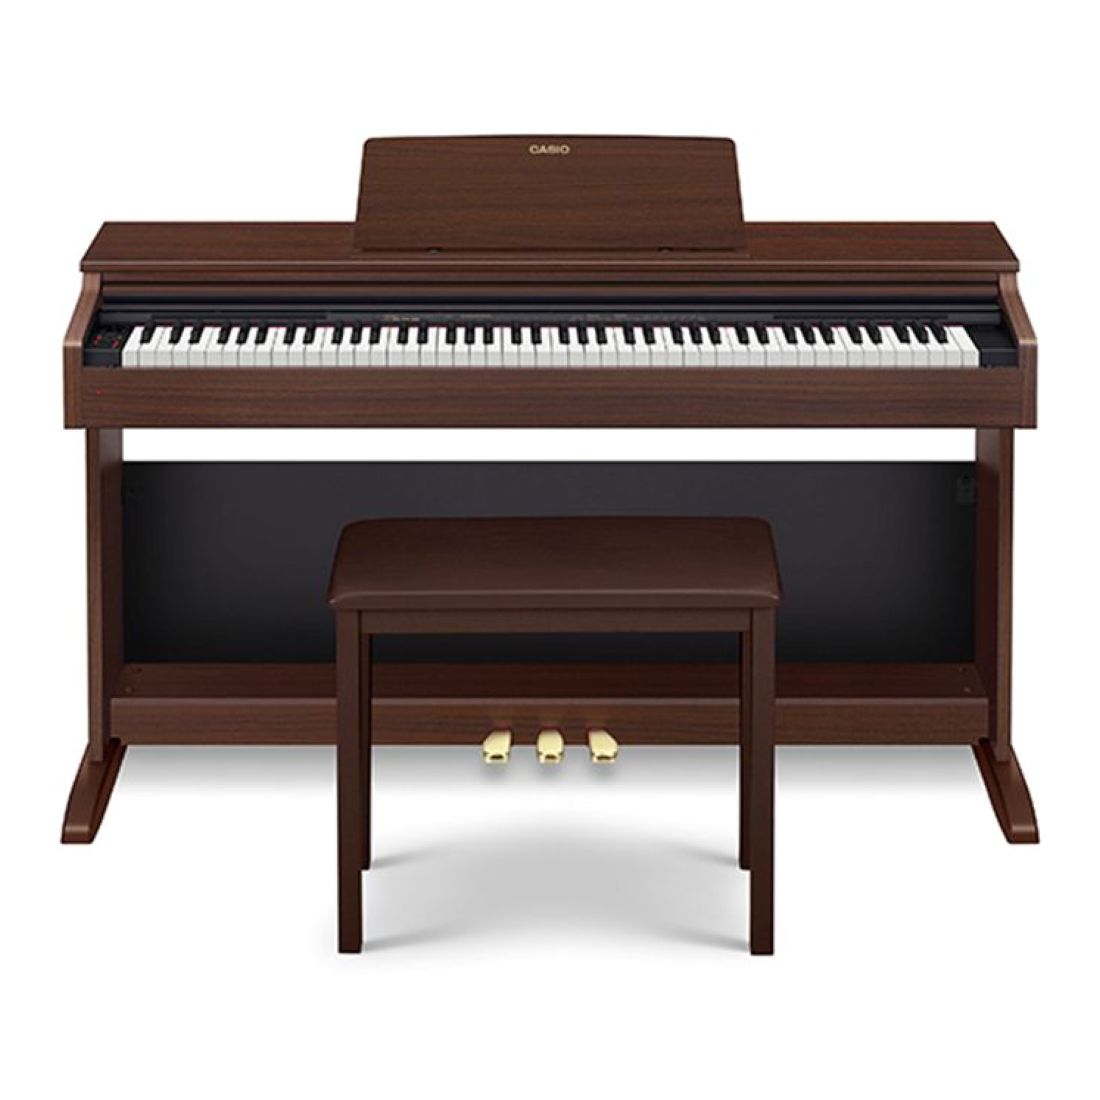 Casio AP-270 Celviano 88-Key Digital Piano with Bench - Brown